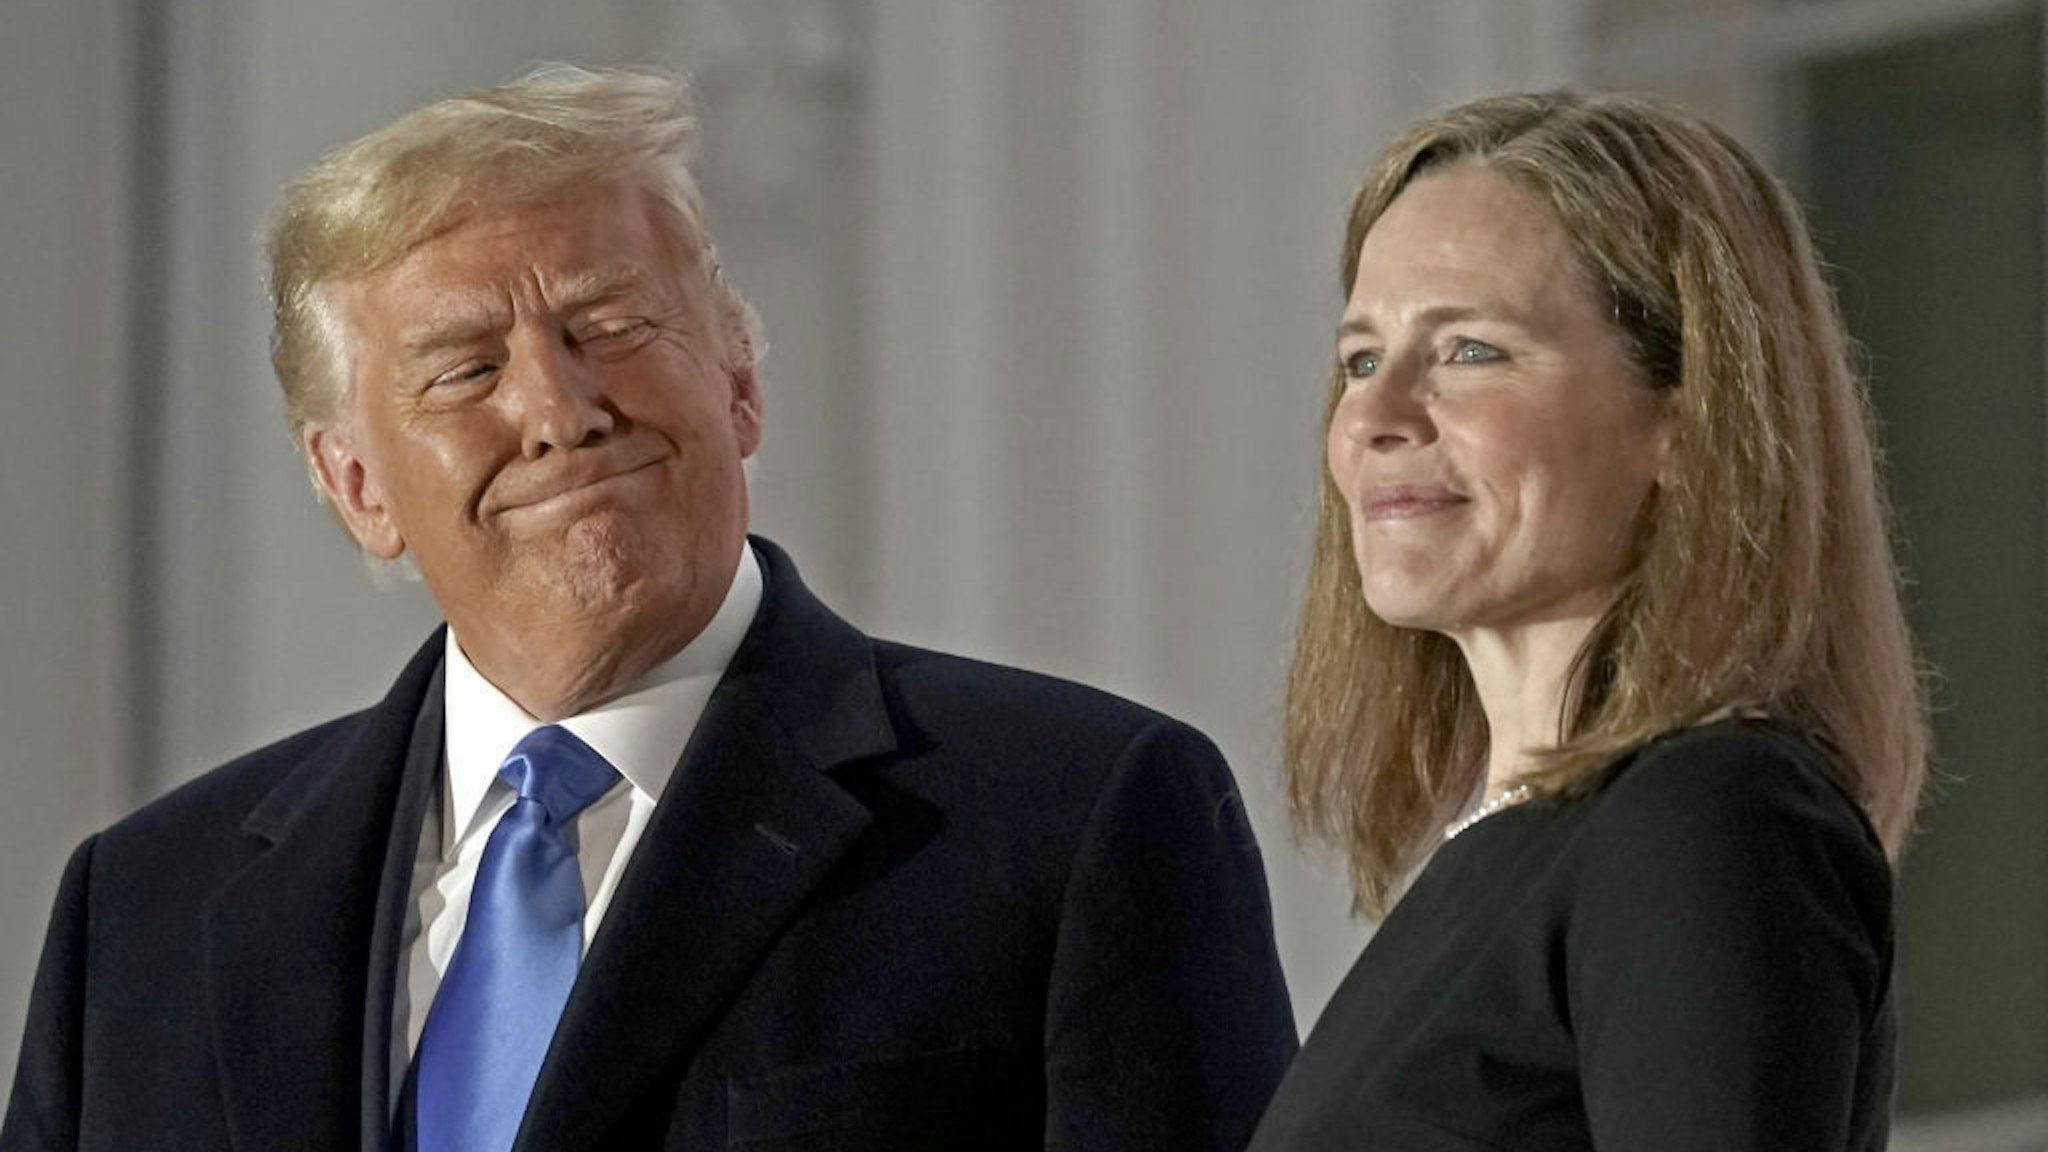 Bloomberg Best Of U.S. President Donald Trump 2017 - 2020: U.S. President Donald Trump, left, and Amy Coney Barrett, associate justice of the U.S. Supreme Court, stand on a balcony during a ceremony on the South Lawn of the White House in Washington, D.C., U.S., on Monday, Oct. 26, 2020. Our editors select the best archive images looking back at Trump’s 4 year term from 2017 - 2020. Photographer: Ken Cedeno/CNP/Bloomberg